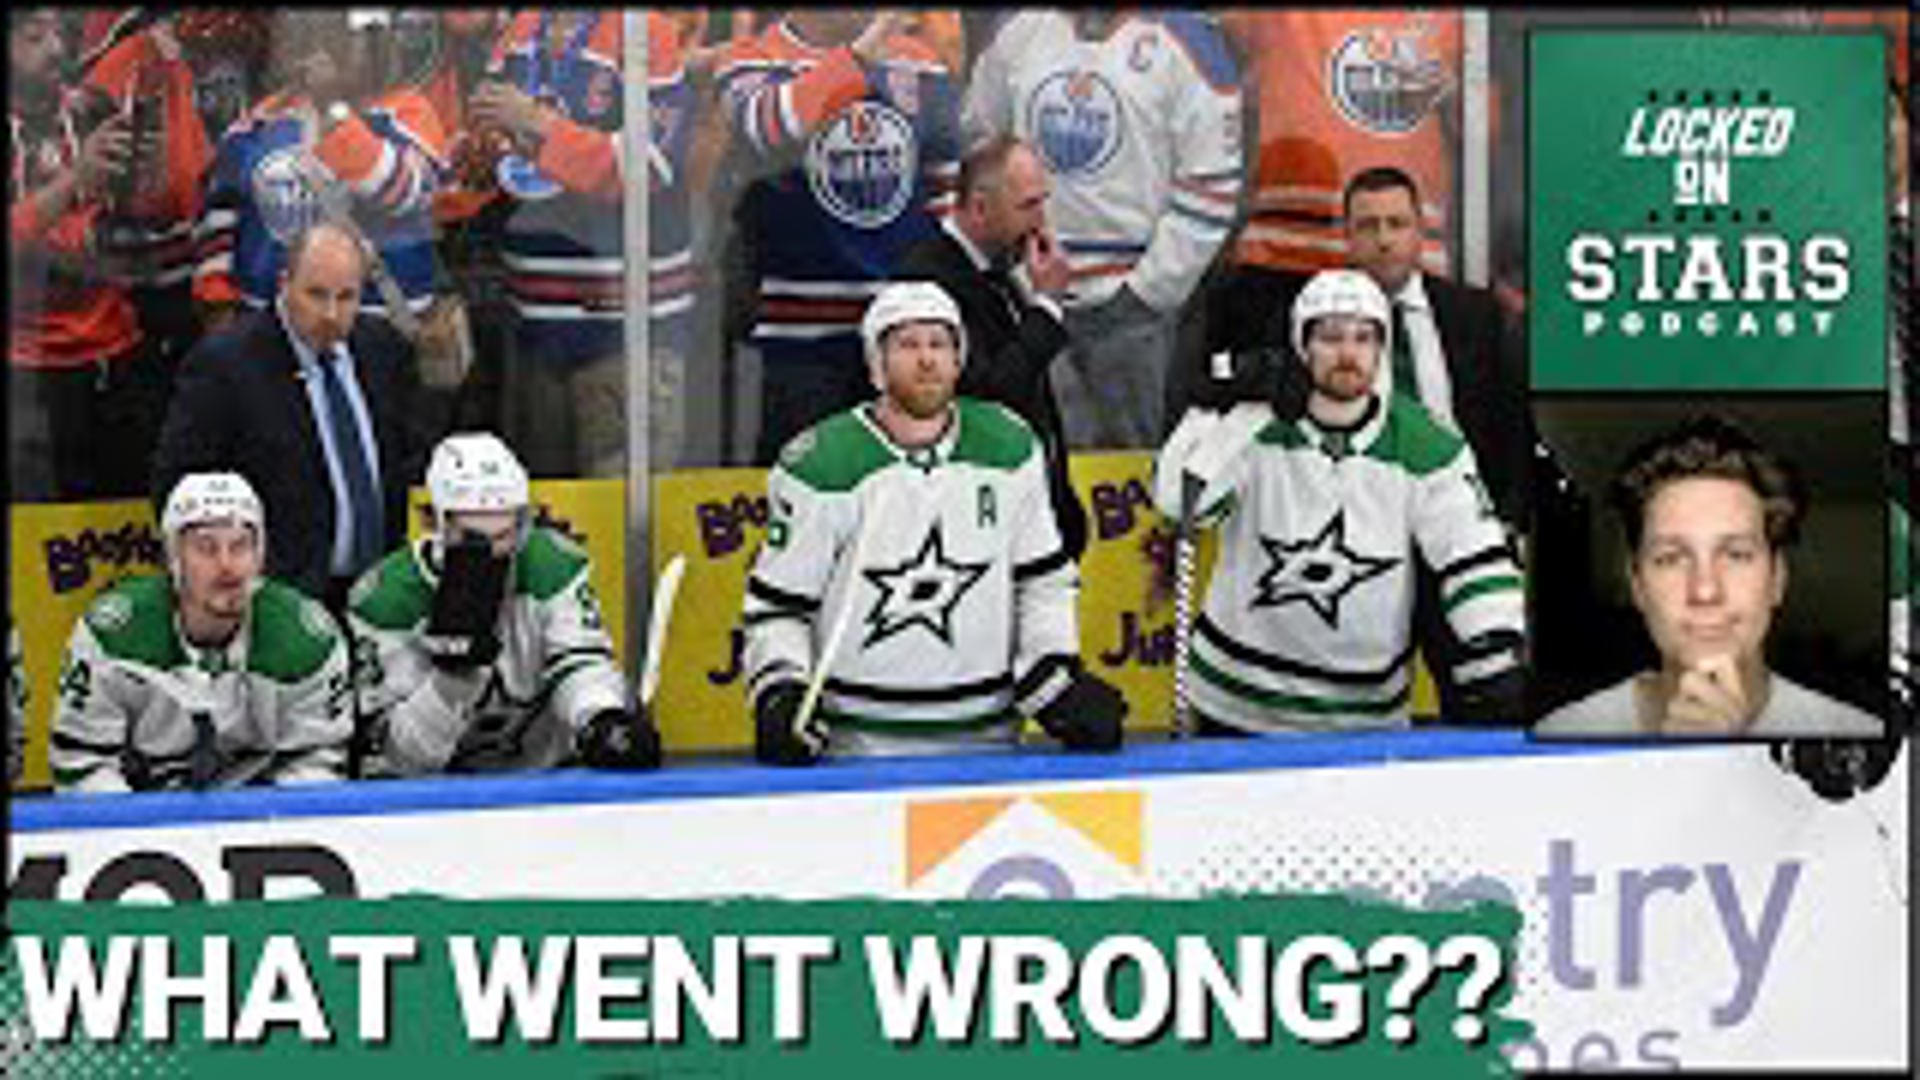 On today's episode, Joey uses Locked On Stars listeners comments and feedback to drive his conversation on what went wrong for the Dallas Stars in the WCF?